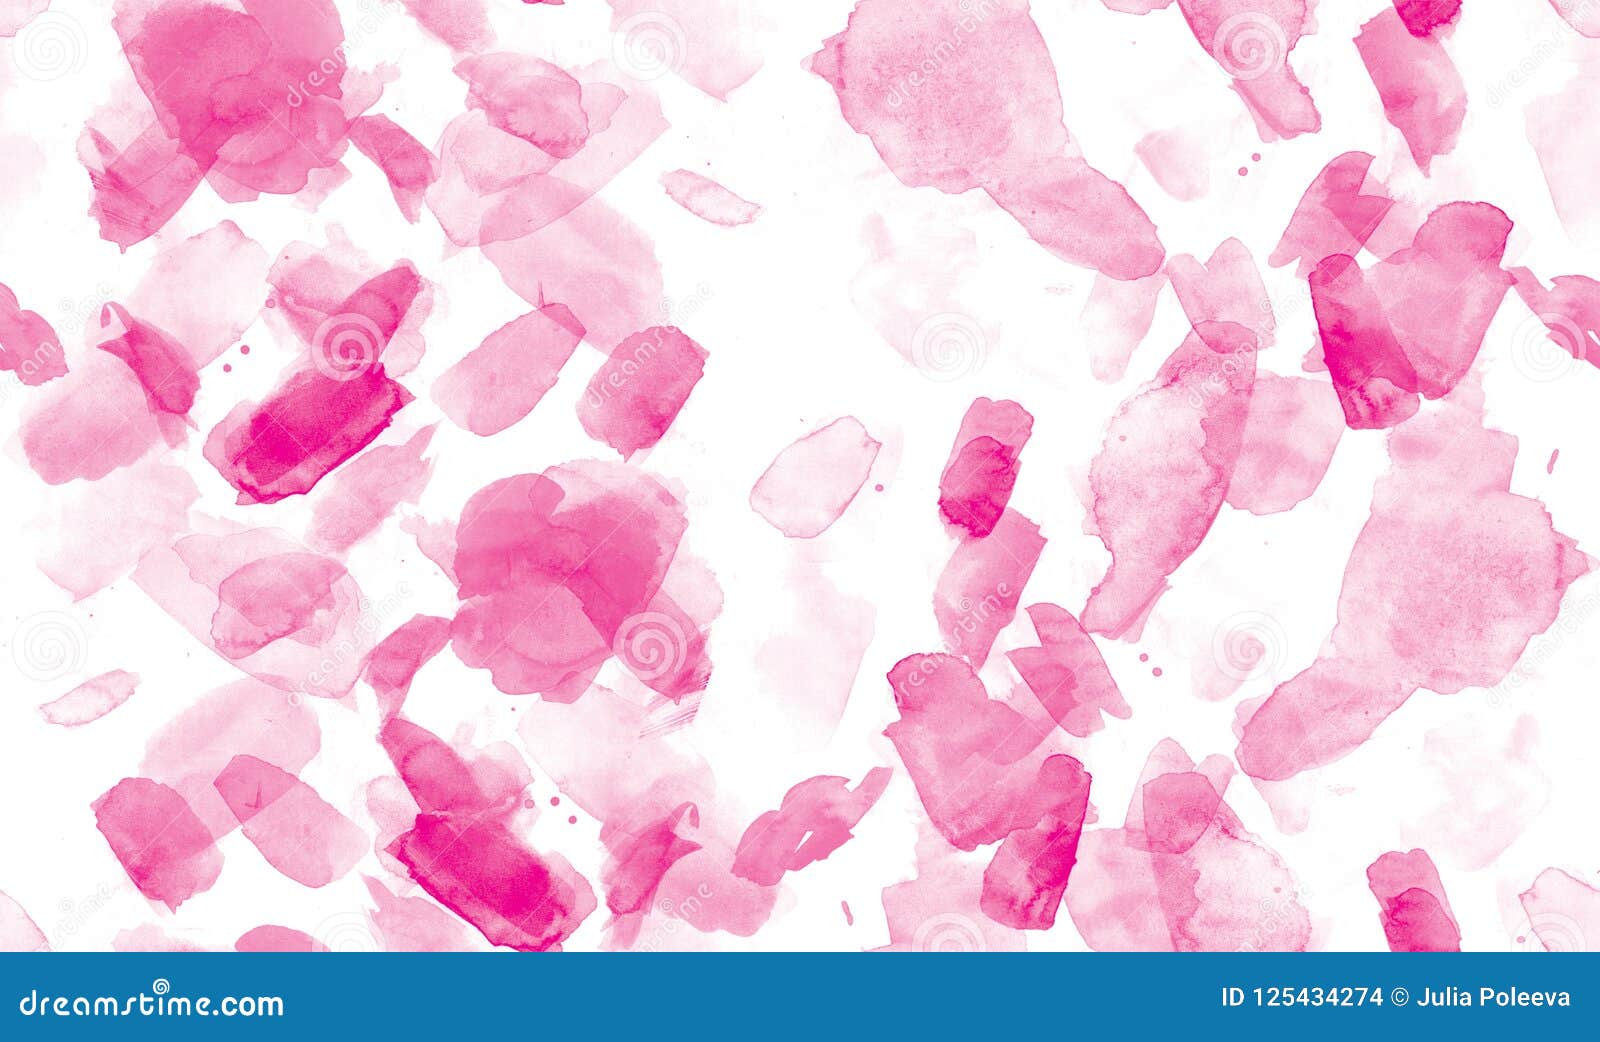 Pink Seamless Pattern Watercolor Blots on White Background Stock ...